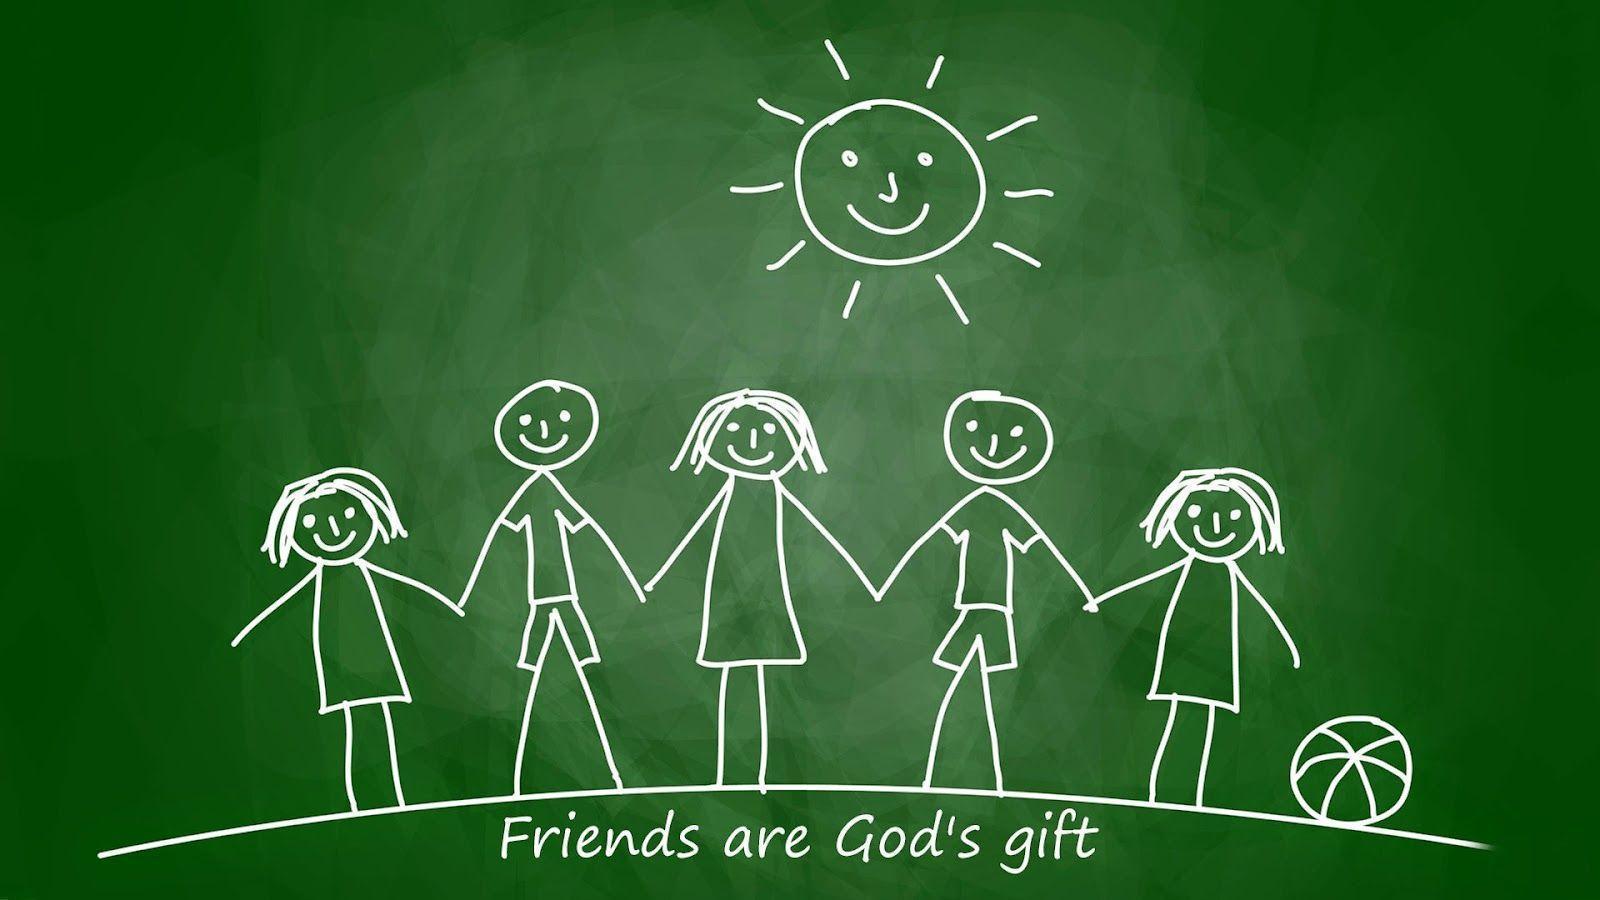 Happy Friendship Day Wallpaper Image Download